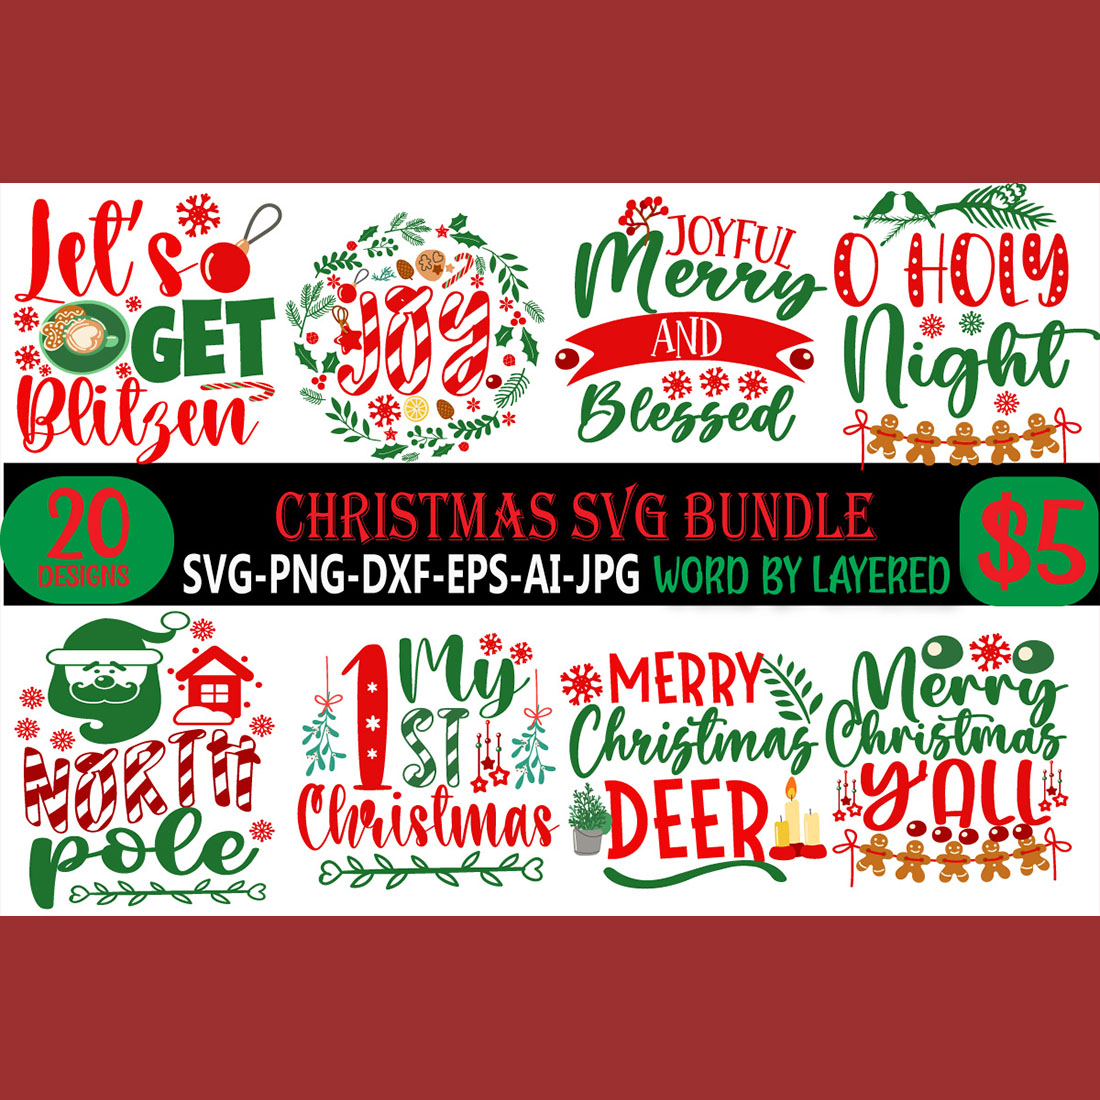 Different Christmas Quotes SVG Bundle cover image.